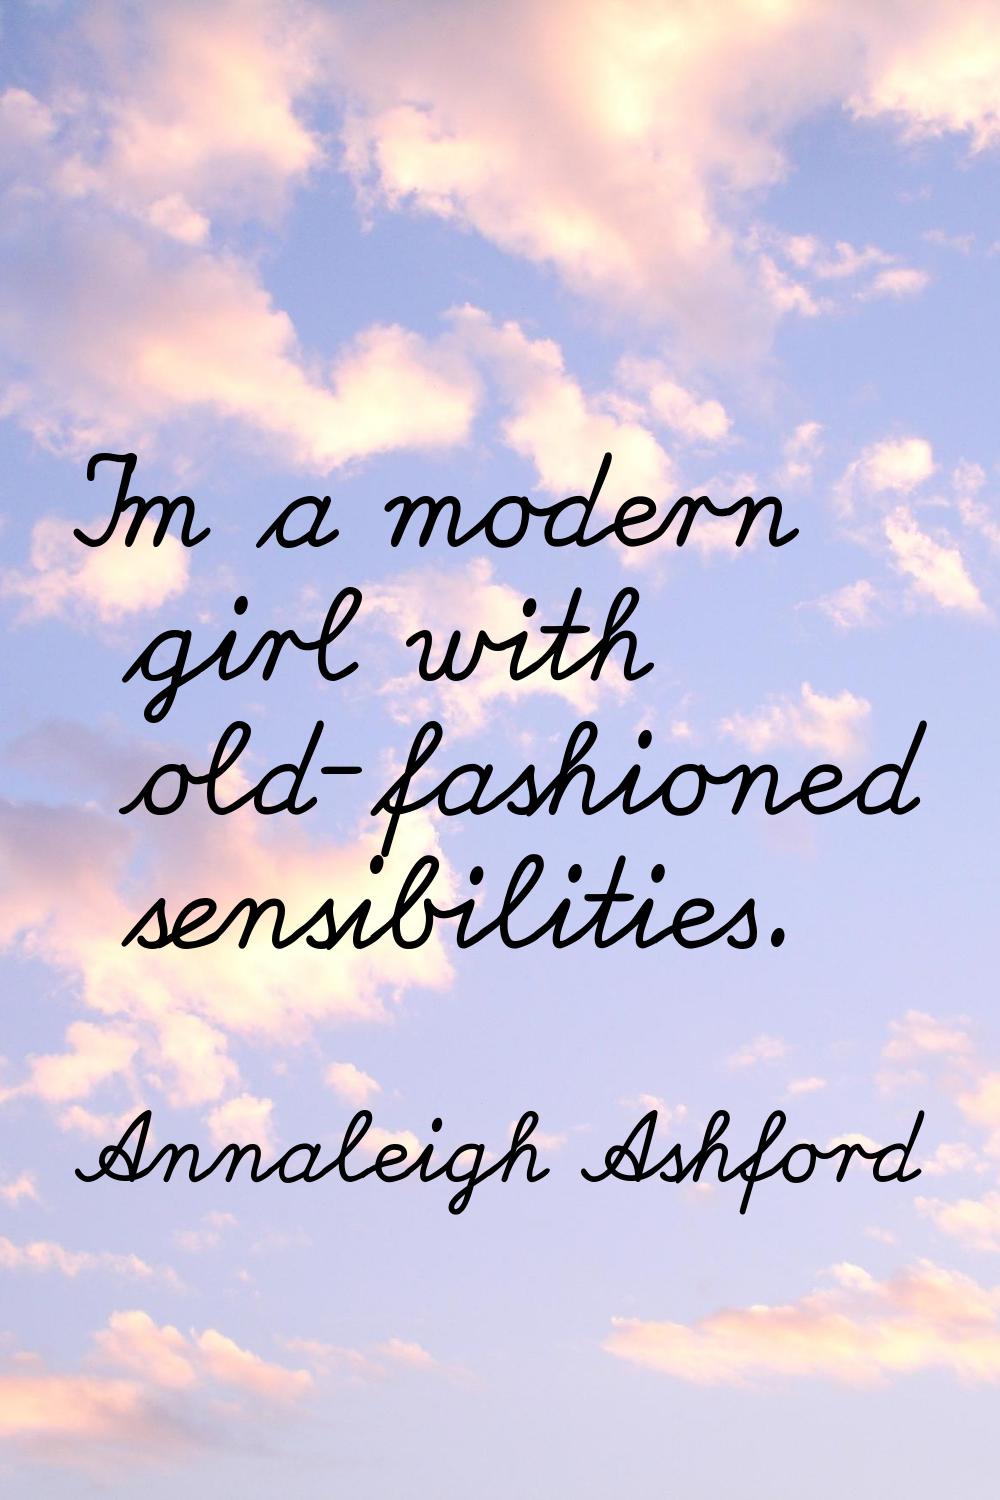 I'm a modern girl with old-fashioned sensibilities.